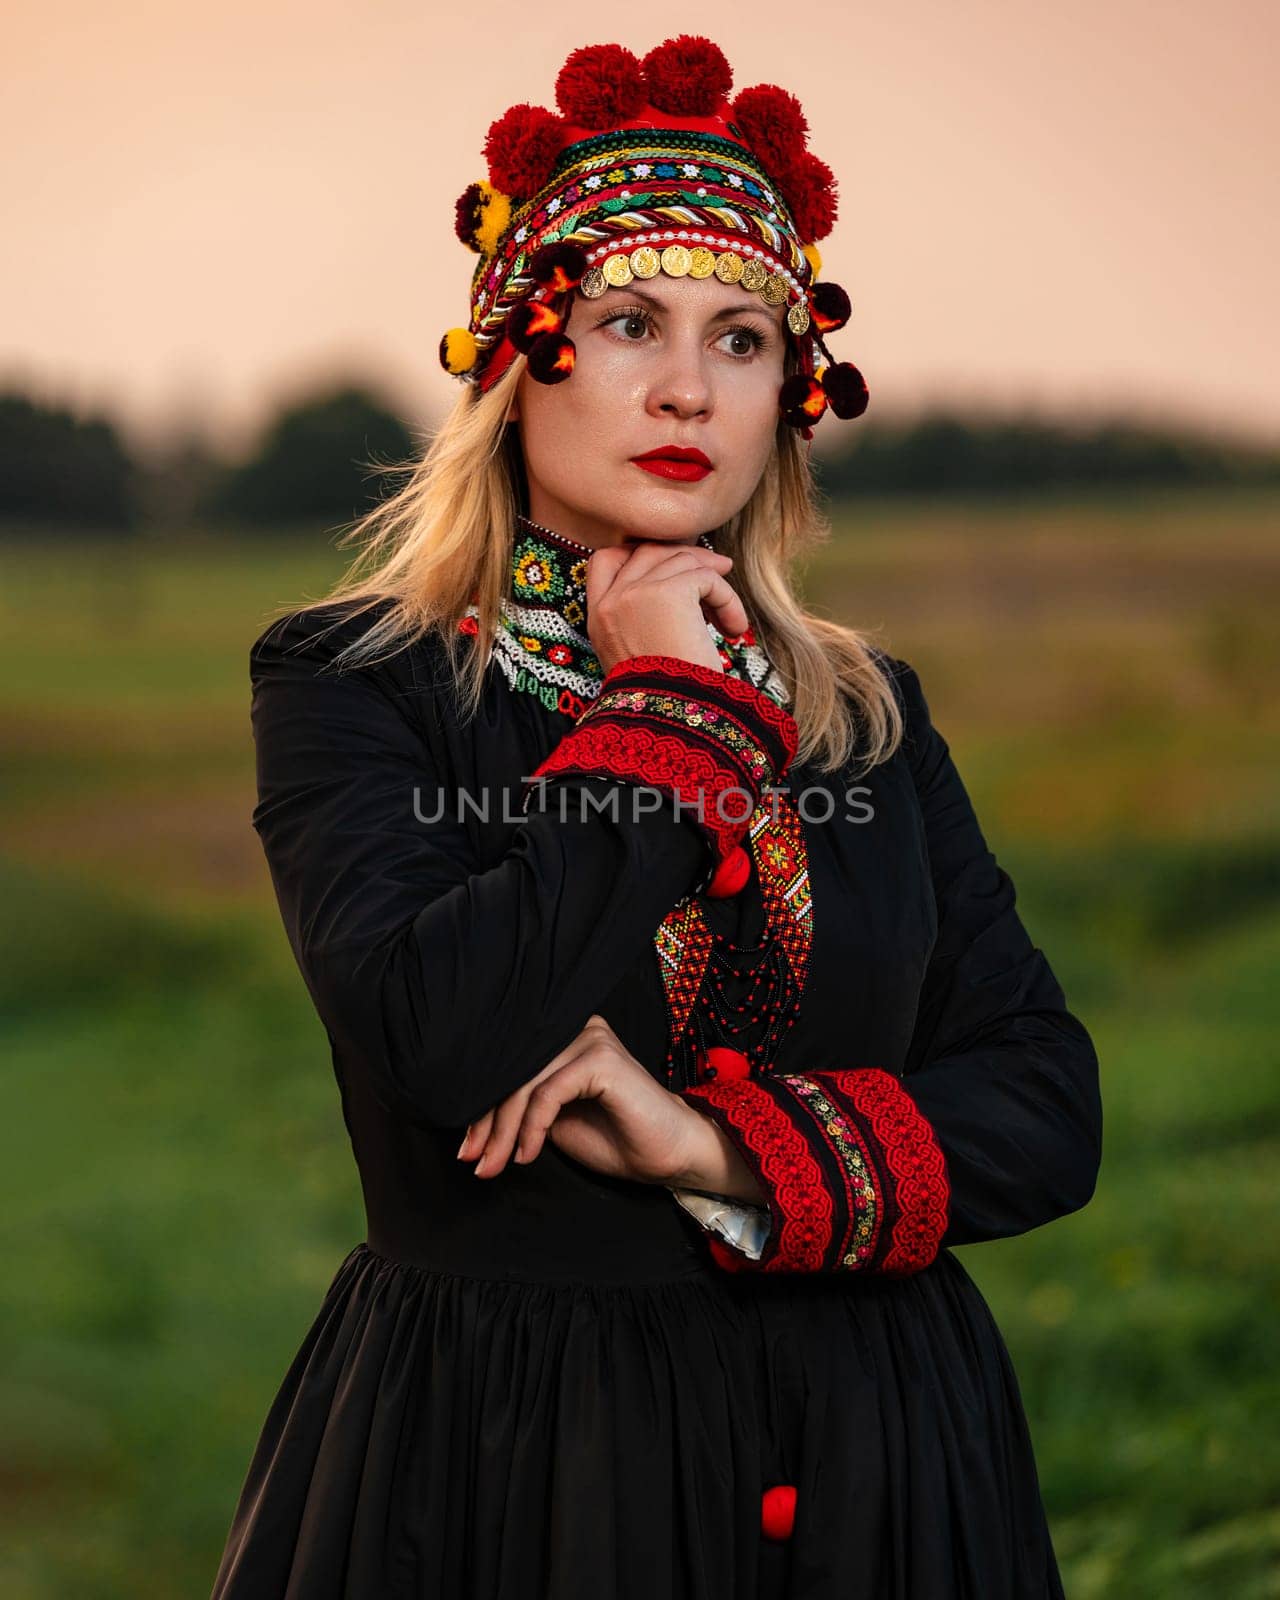 A girl in a chelsea headdress and a black dress decorated with red embroidery on the background of a field and sky, Ukrainian traditional and national clothing.